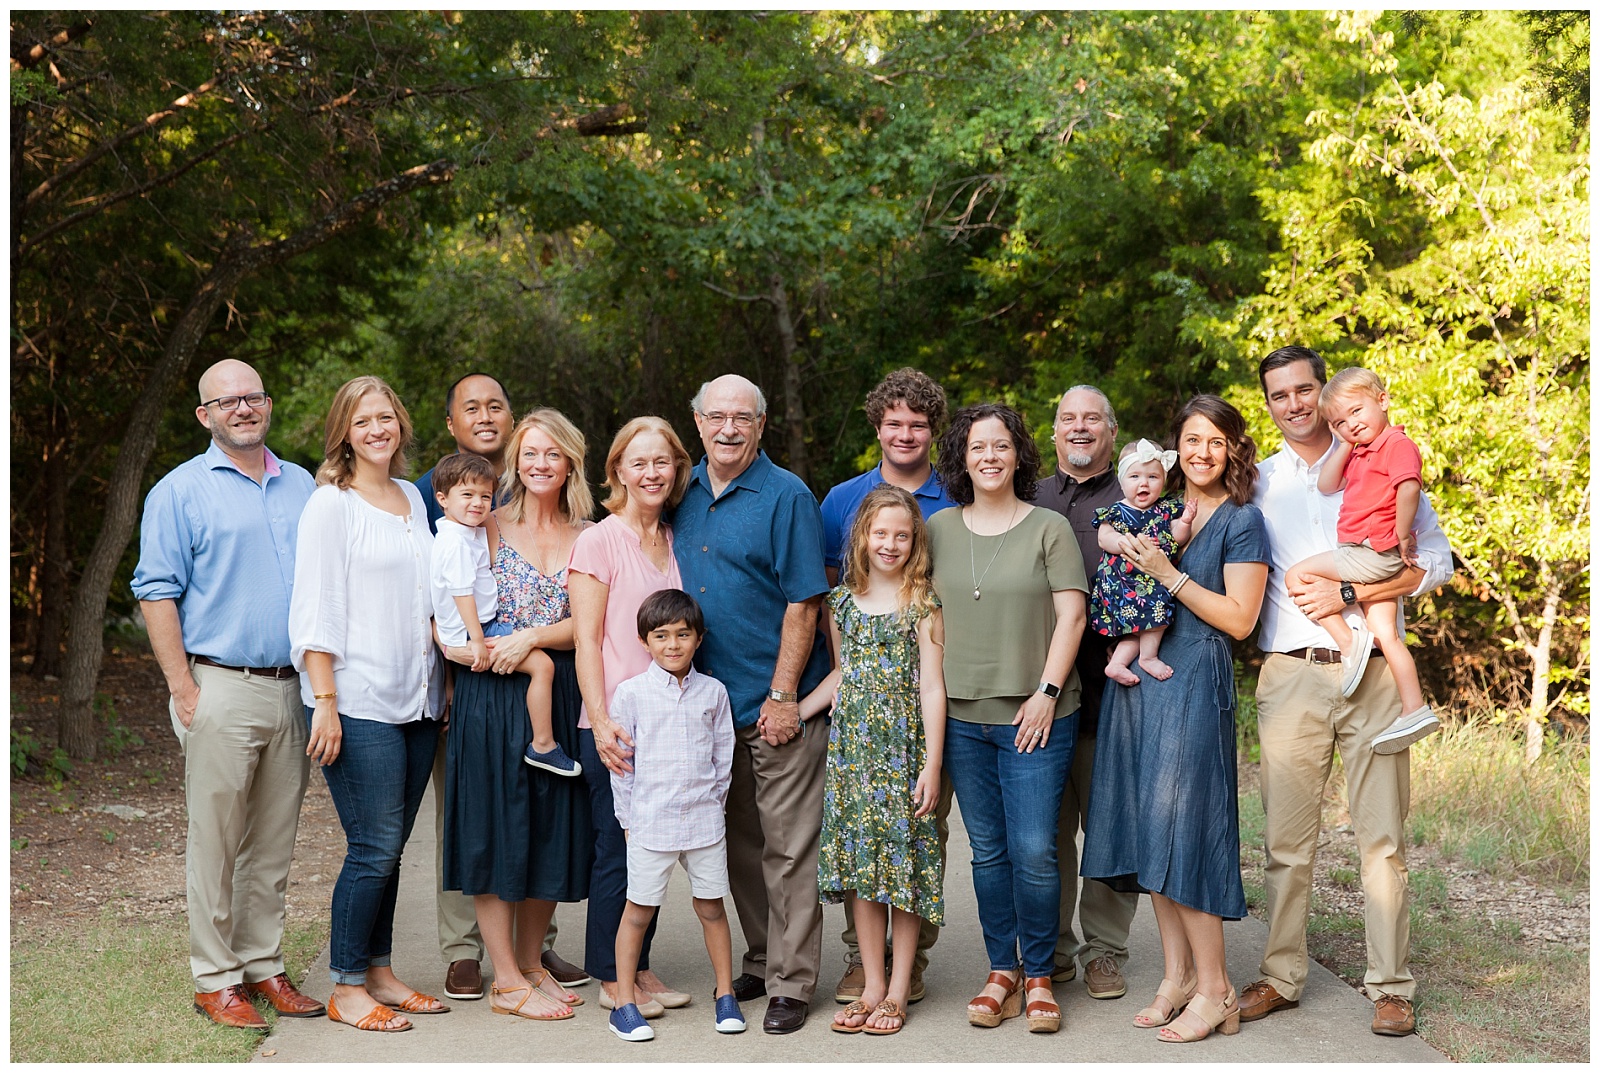 An extended family session at Arbor Hills Nature Preserve in Dallas Texas by Alyssa Grace Photography